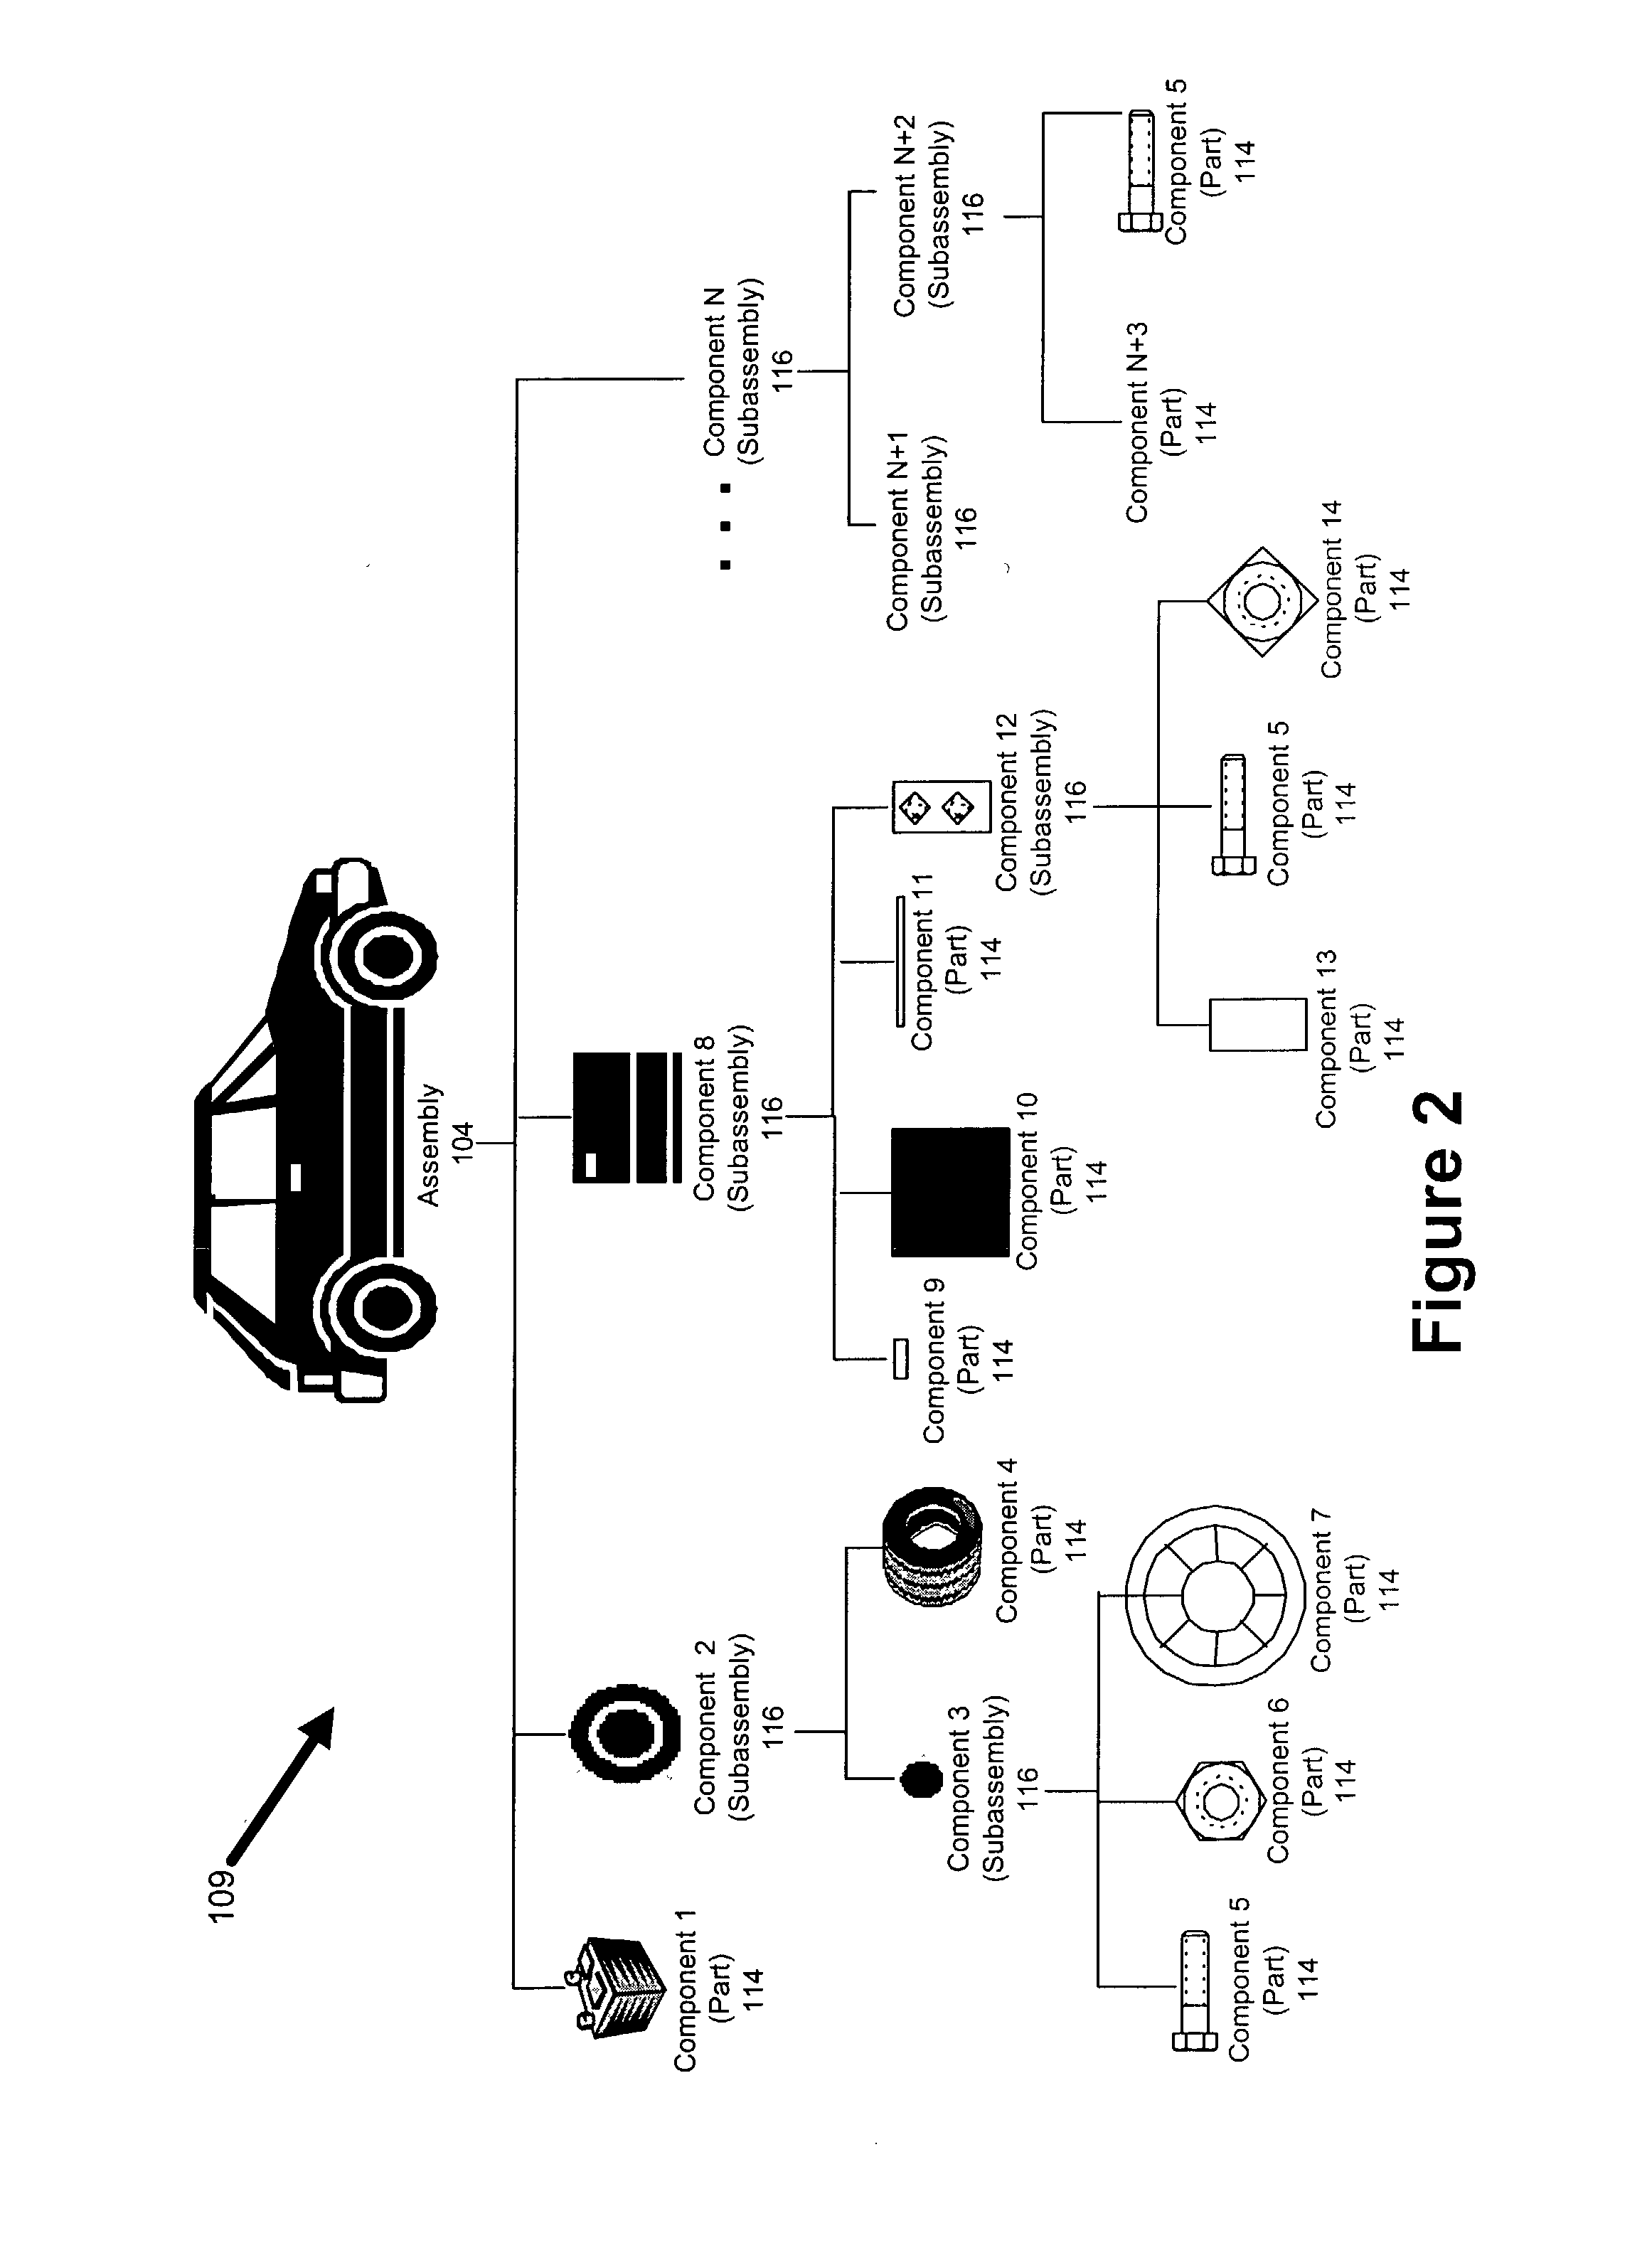 System and method for creating a representation of an assembly